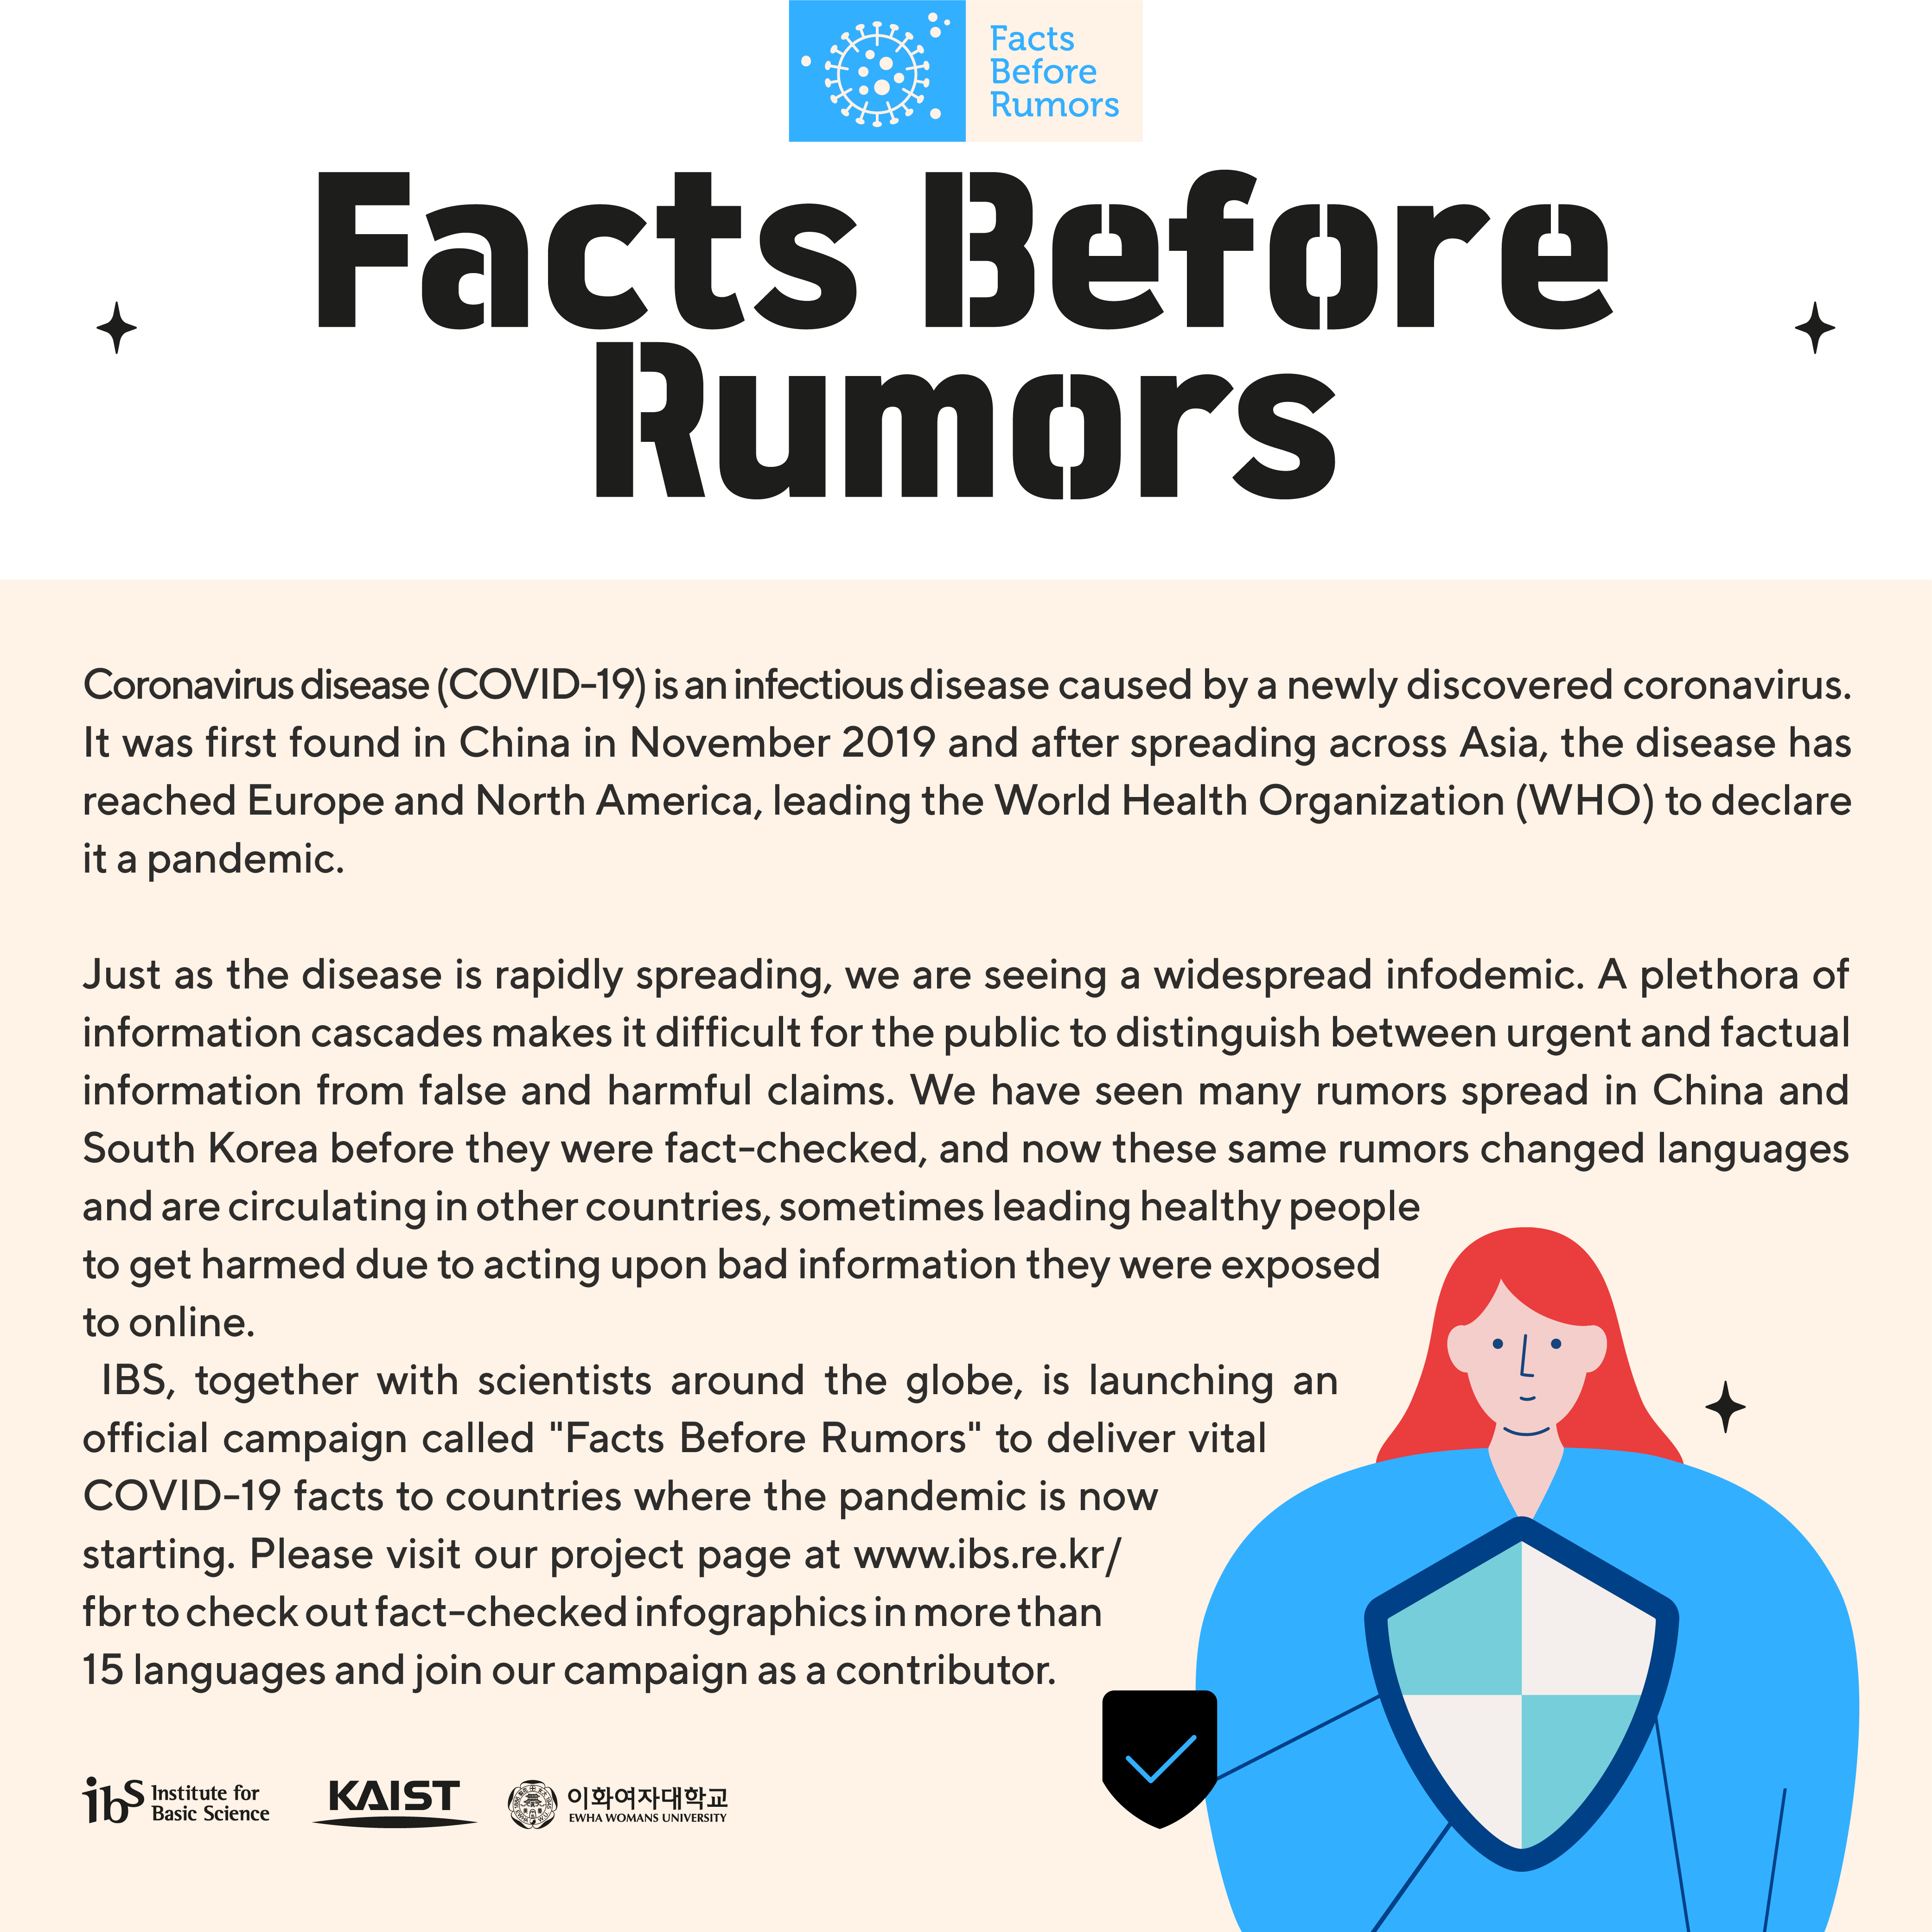 IBS-Facts-Before-Rumors_English-01